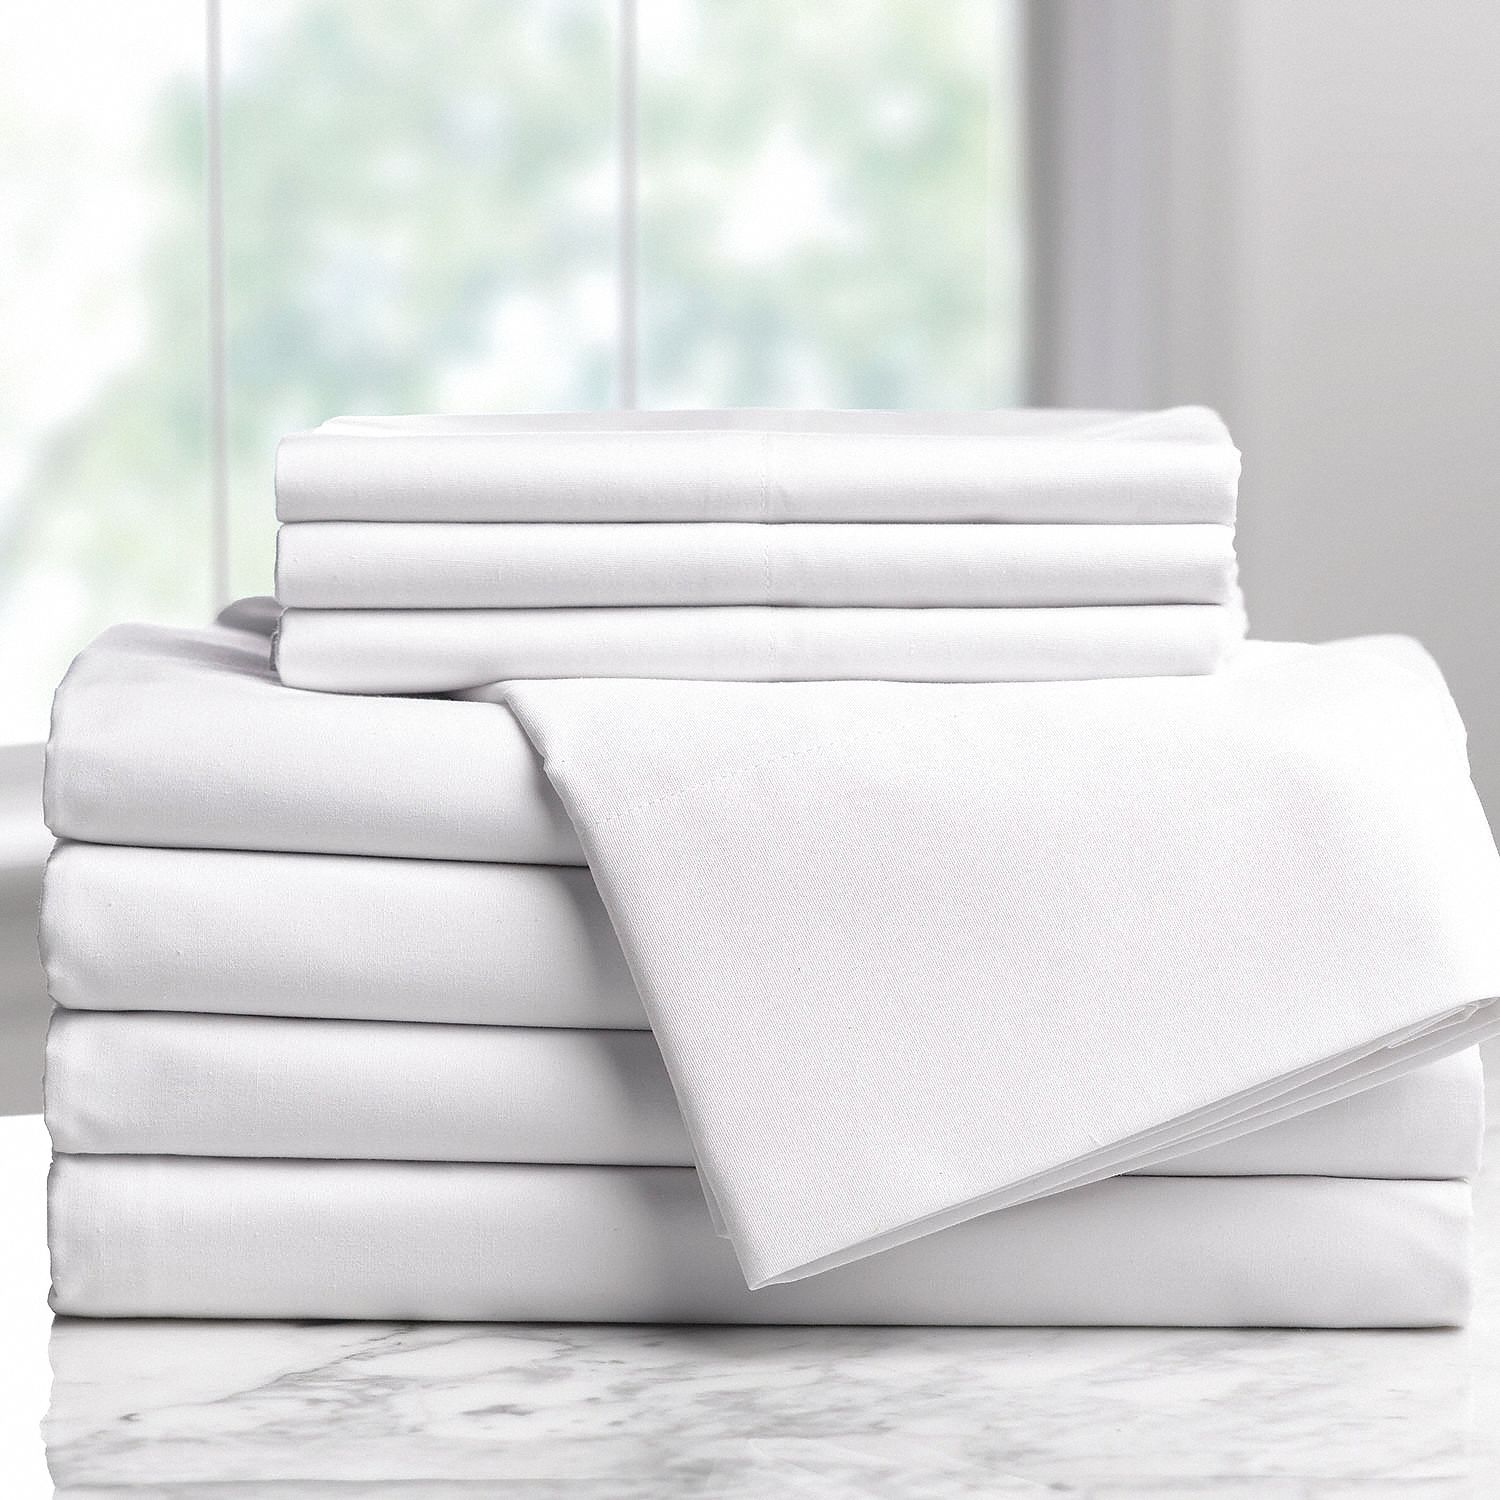 Pillowcase: Full, 44 in Wd, 35 in Lg, 60% Cotton/40% Polyester Fabric, T200, White, 12 PK